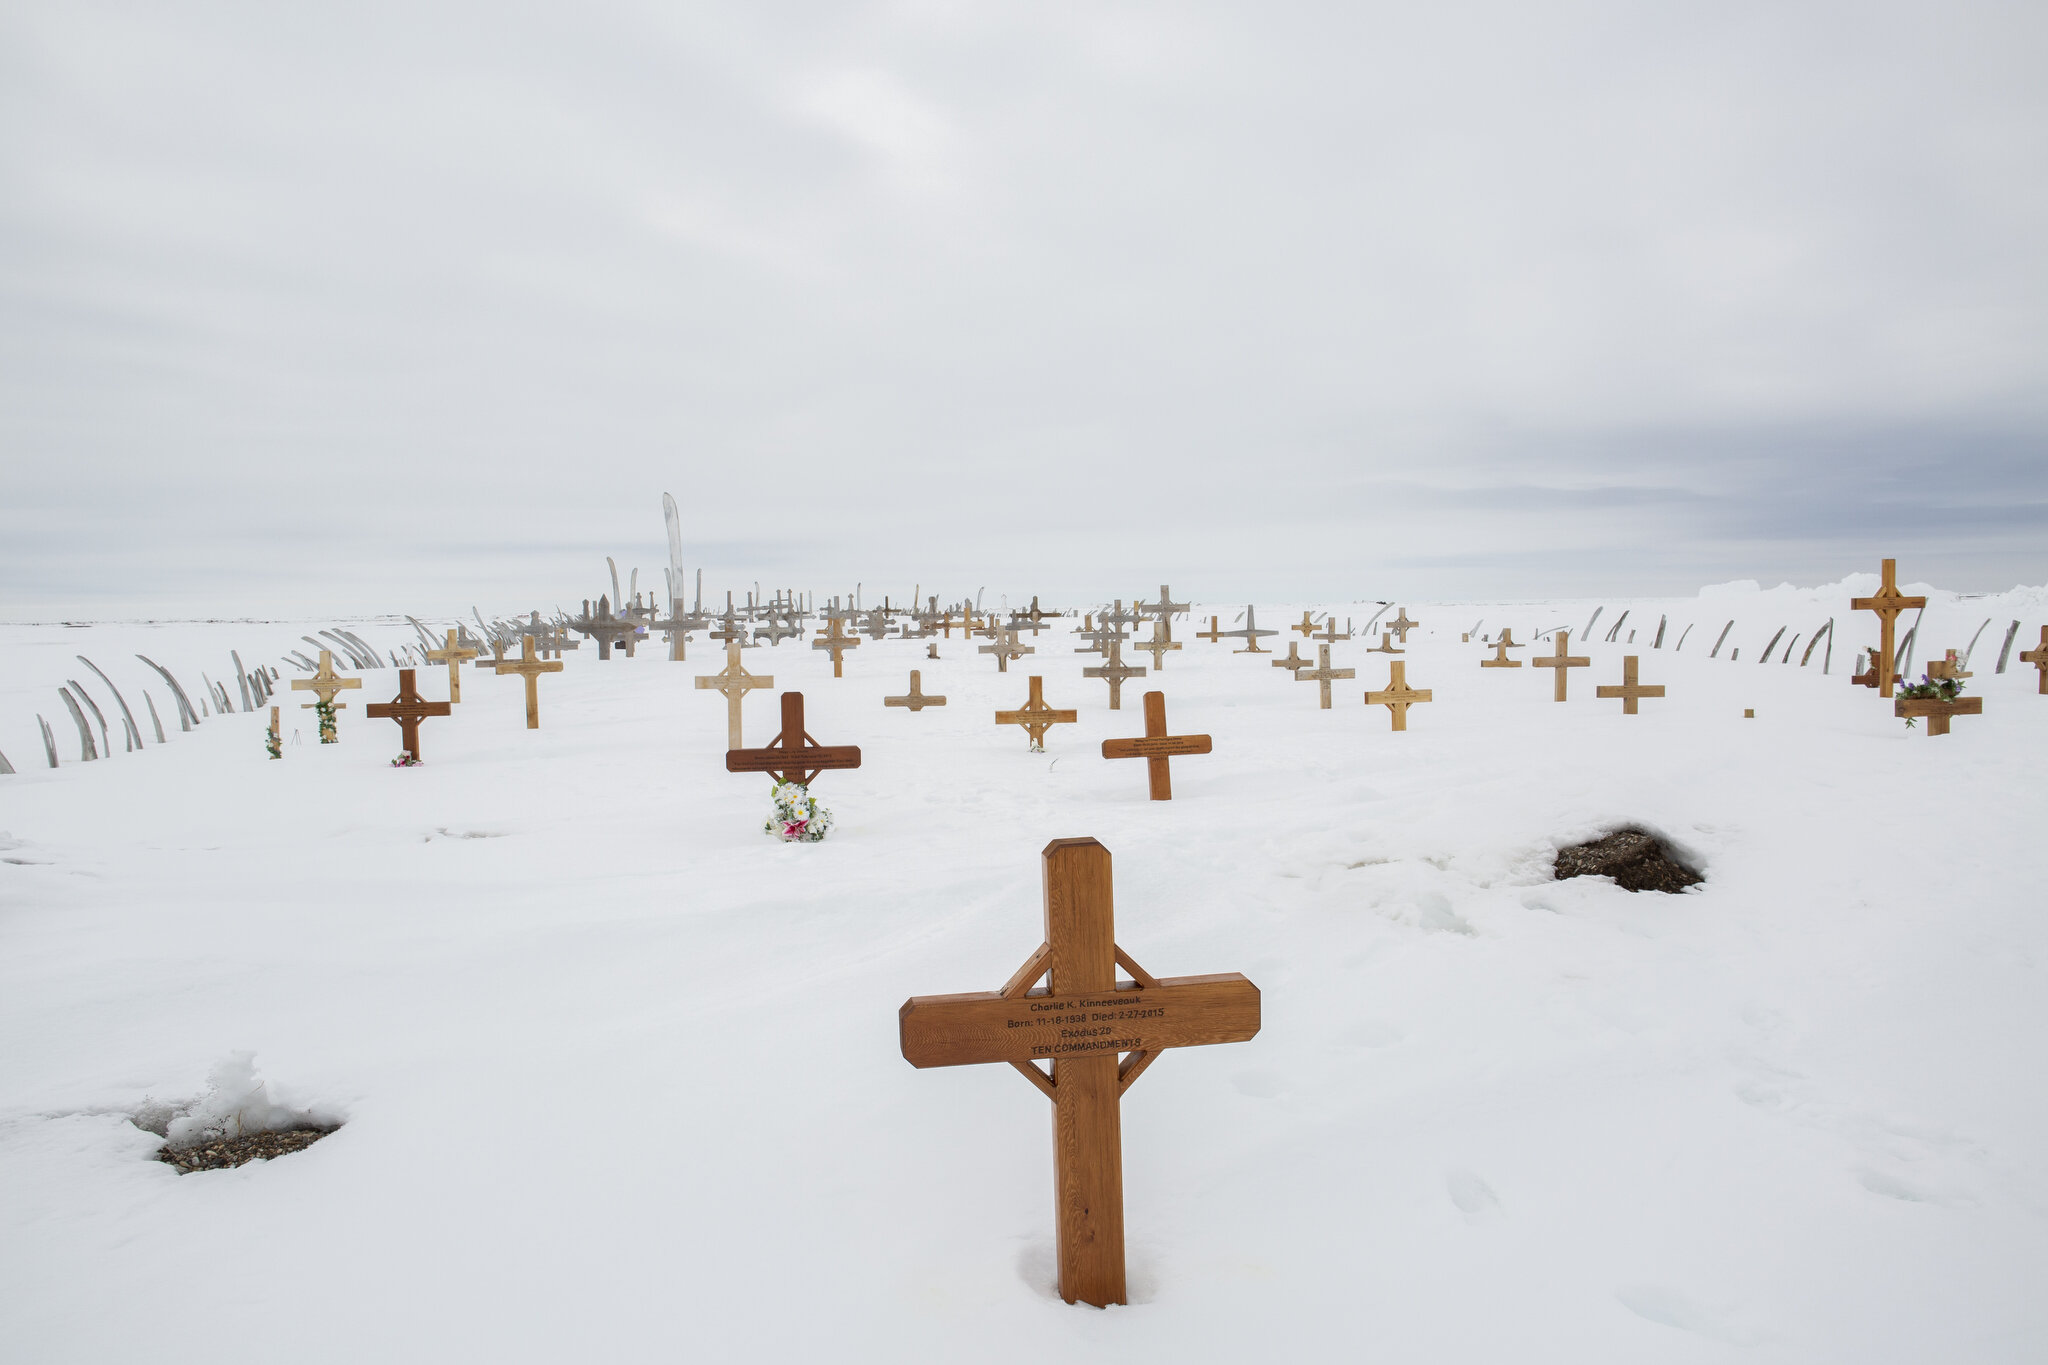  The cemetery for whaling captains in Point Hope, Alaska. May 8th, 2015. The cemetery fence is made of bleached whale bones. According to the Arctic Slope Regional Corporation, Point Hope is the longest continually inhabited community in North Americ